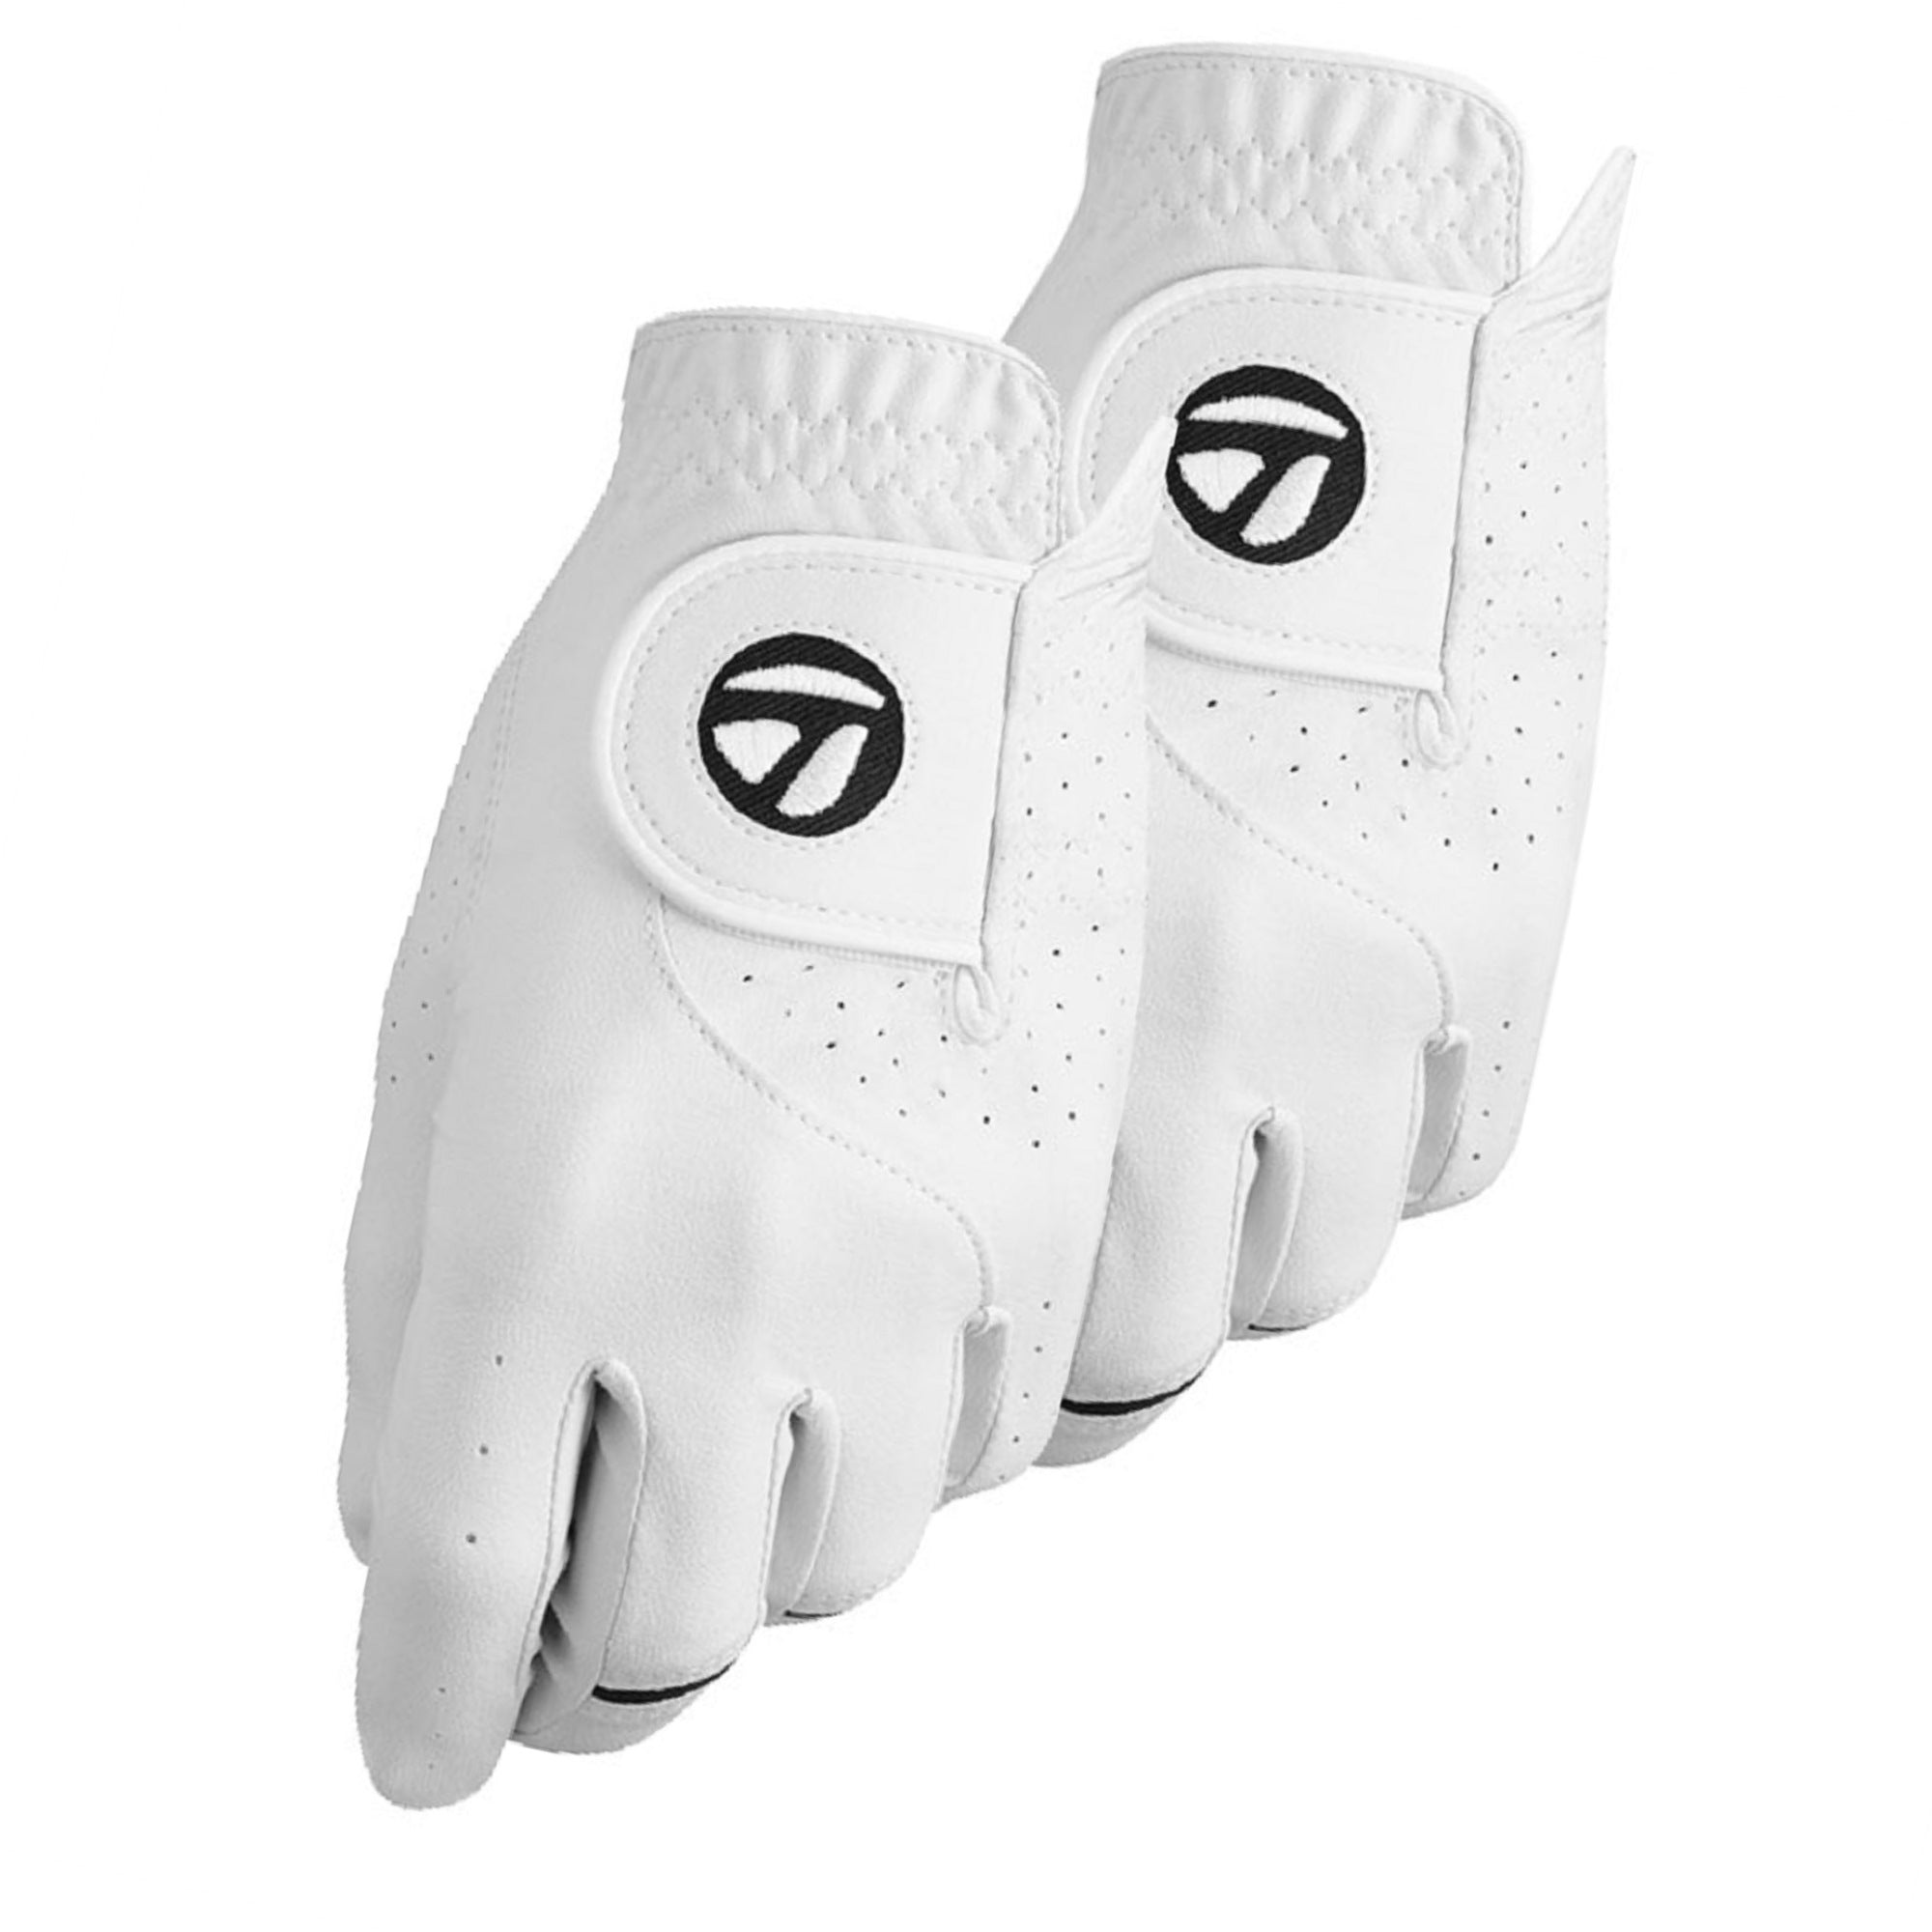 taylormade-stratus-tech-glove-2-pack-n64066-mlh